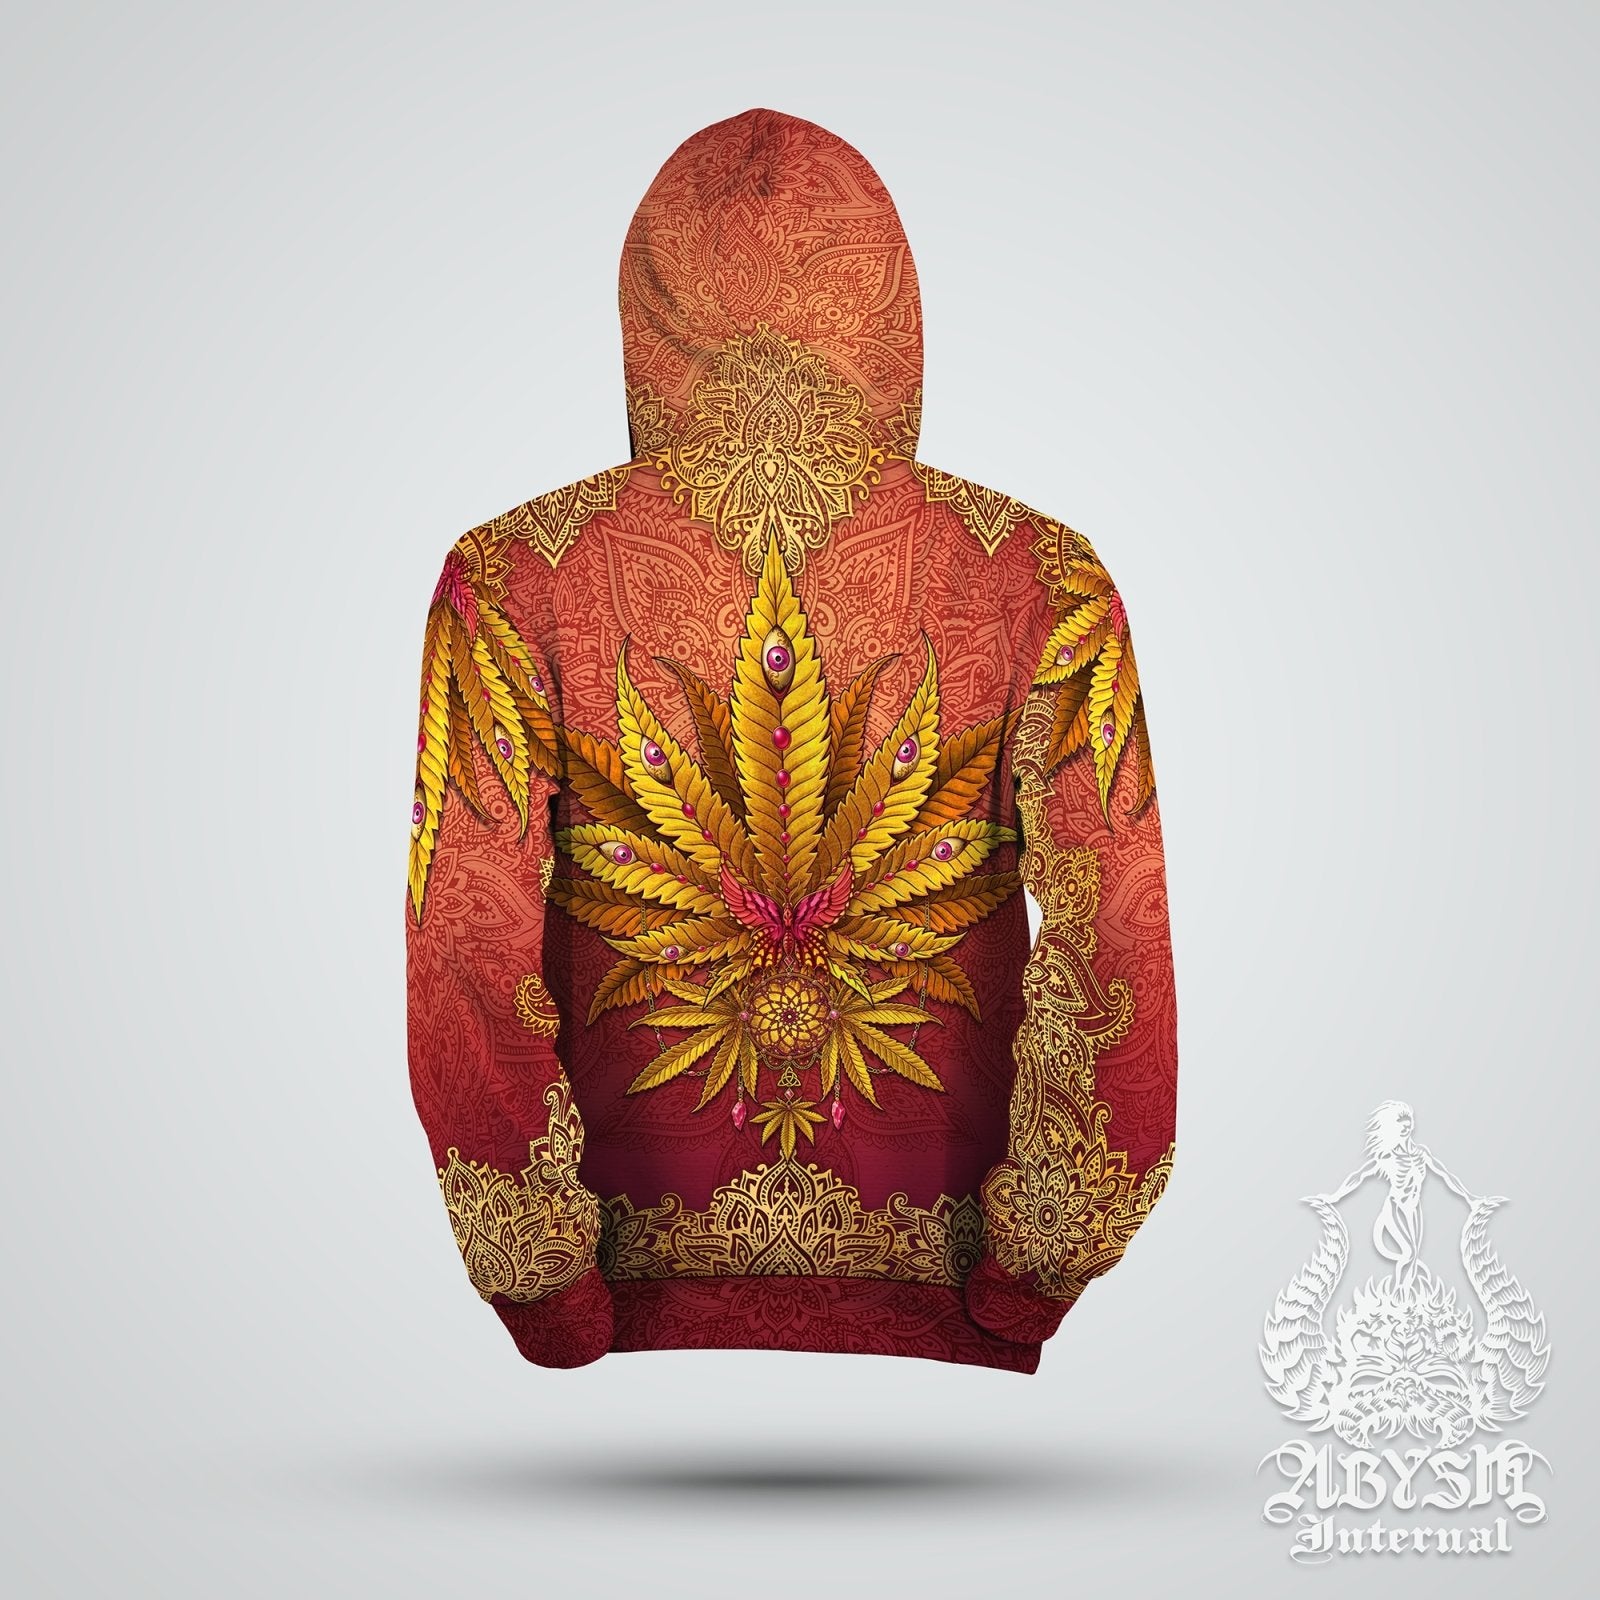 Boho Weed Hoodie, Hippie Clothes, Cannabis Festival Outfit, Trippy Streetwear, Indie and Alternative Clothing, Unisex, 420 Gift - Marijuana, Mandalas - Abysm Internal